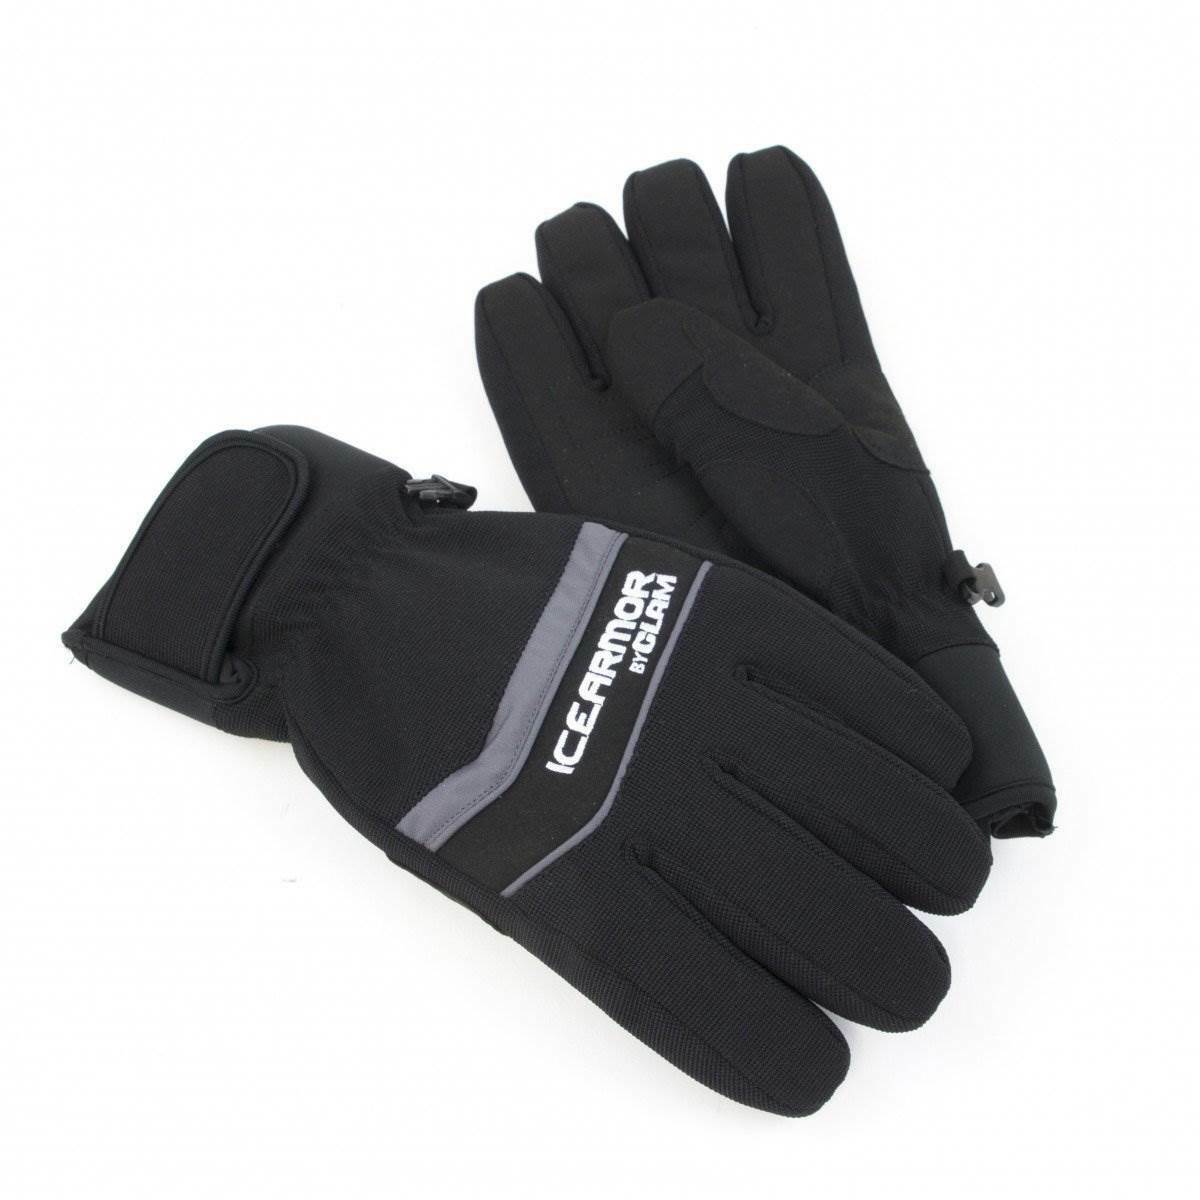 A pair of CLAM IceArmor Edge Cold Weather gloves on a white background.